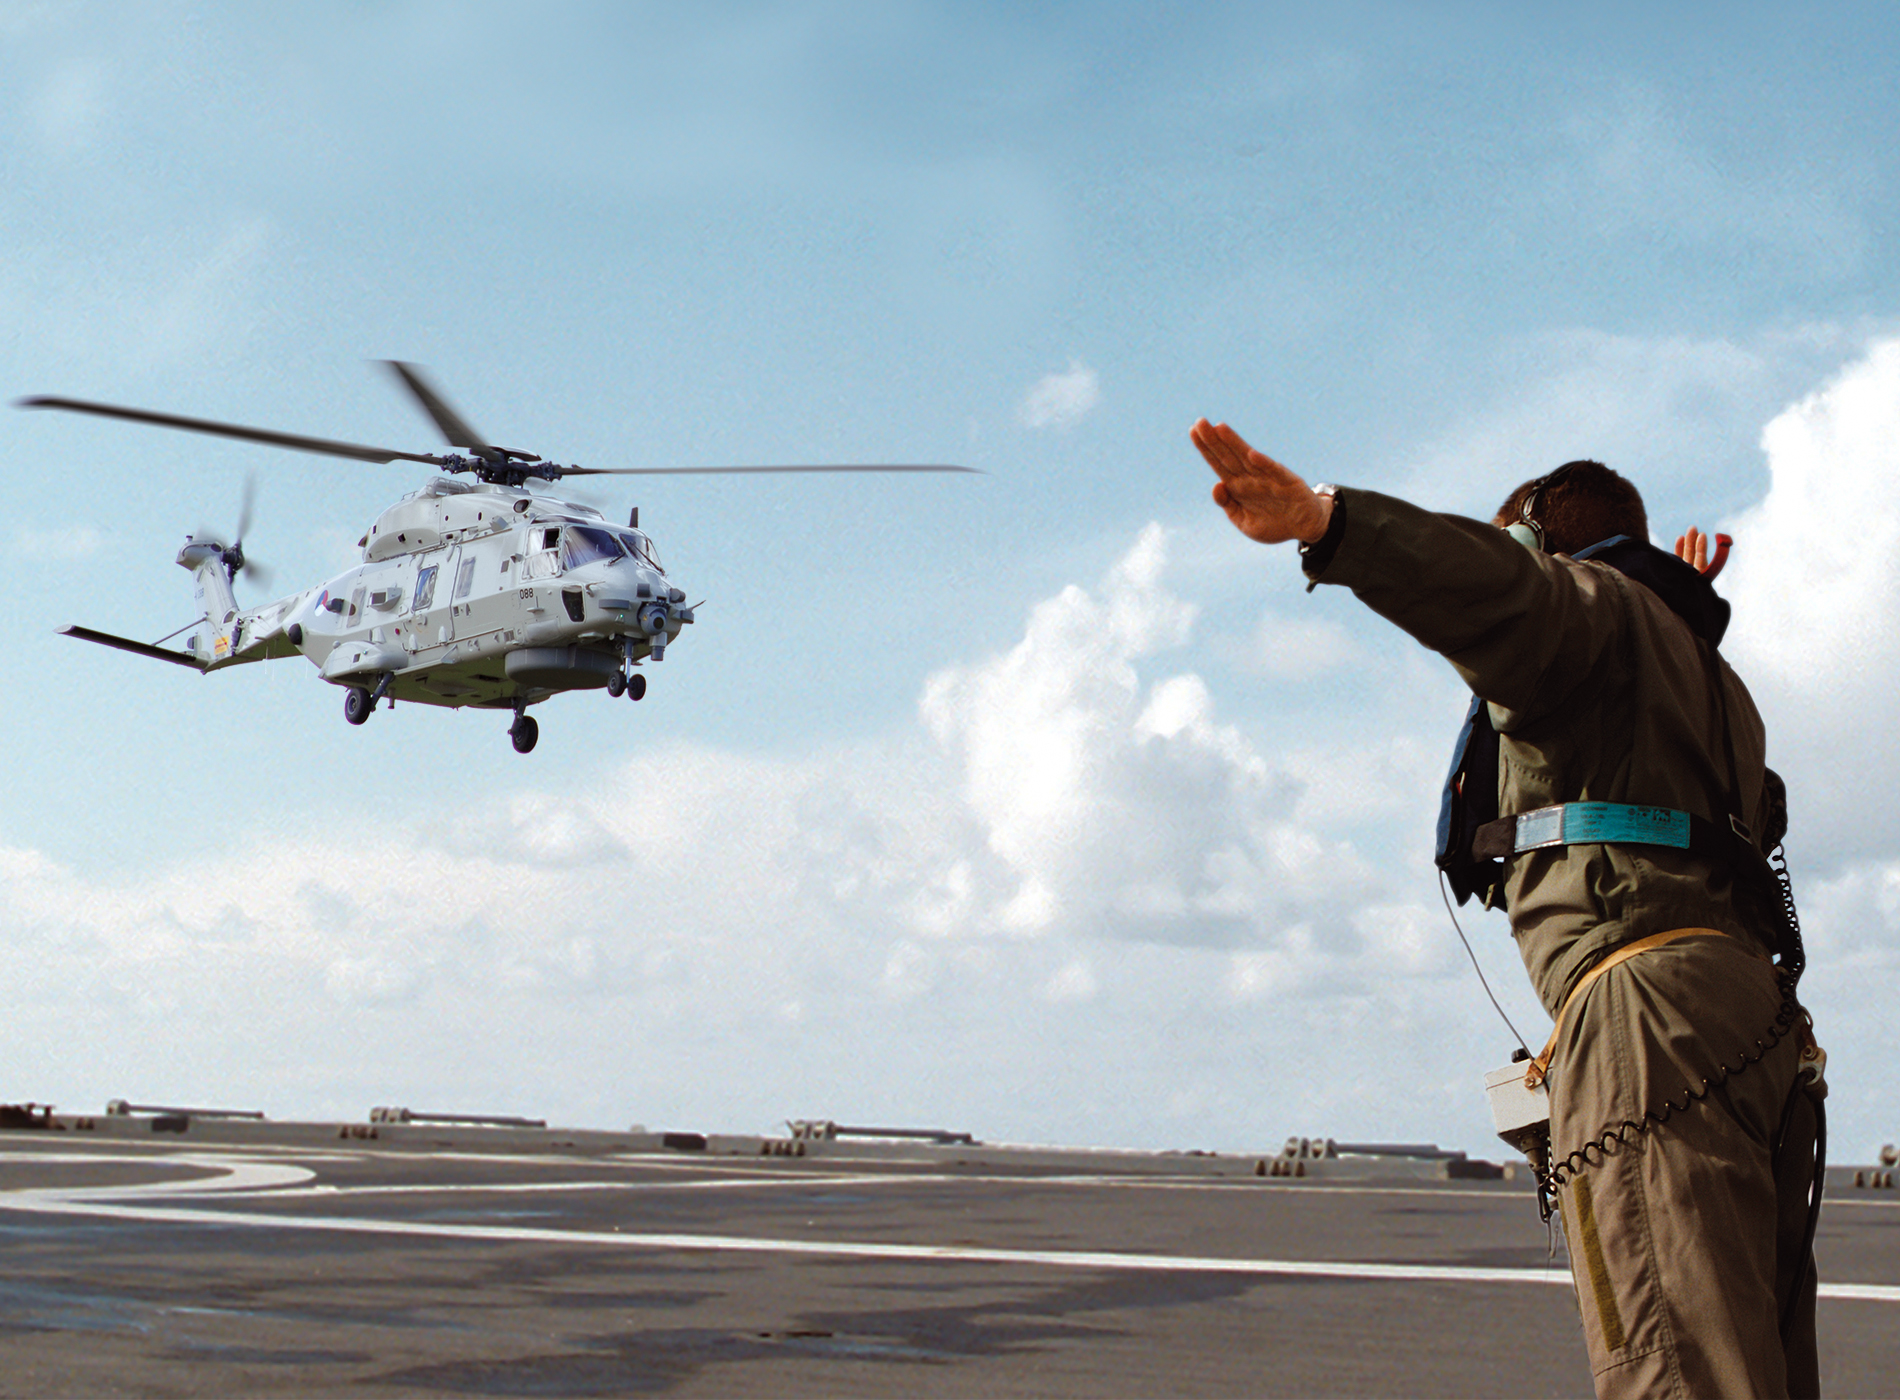 Helicopter-ship qualification - the course